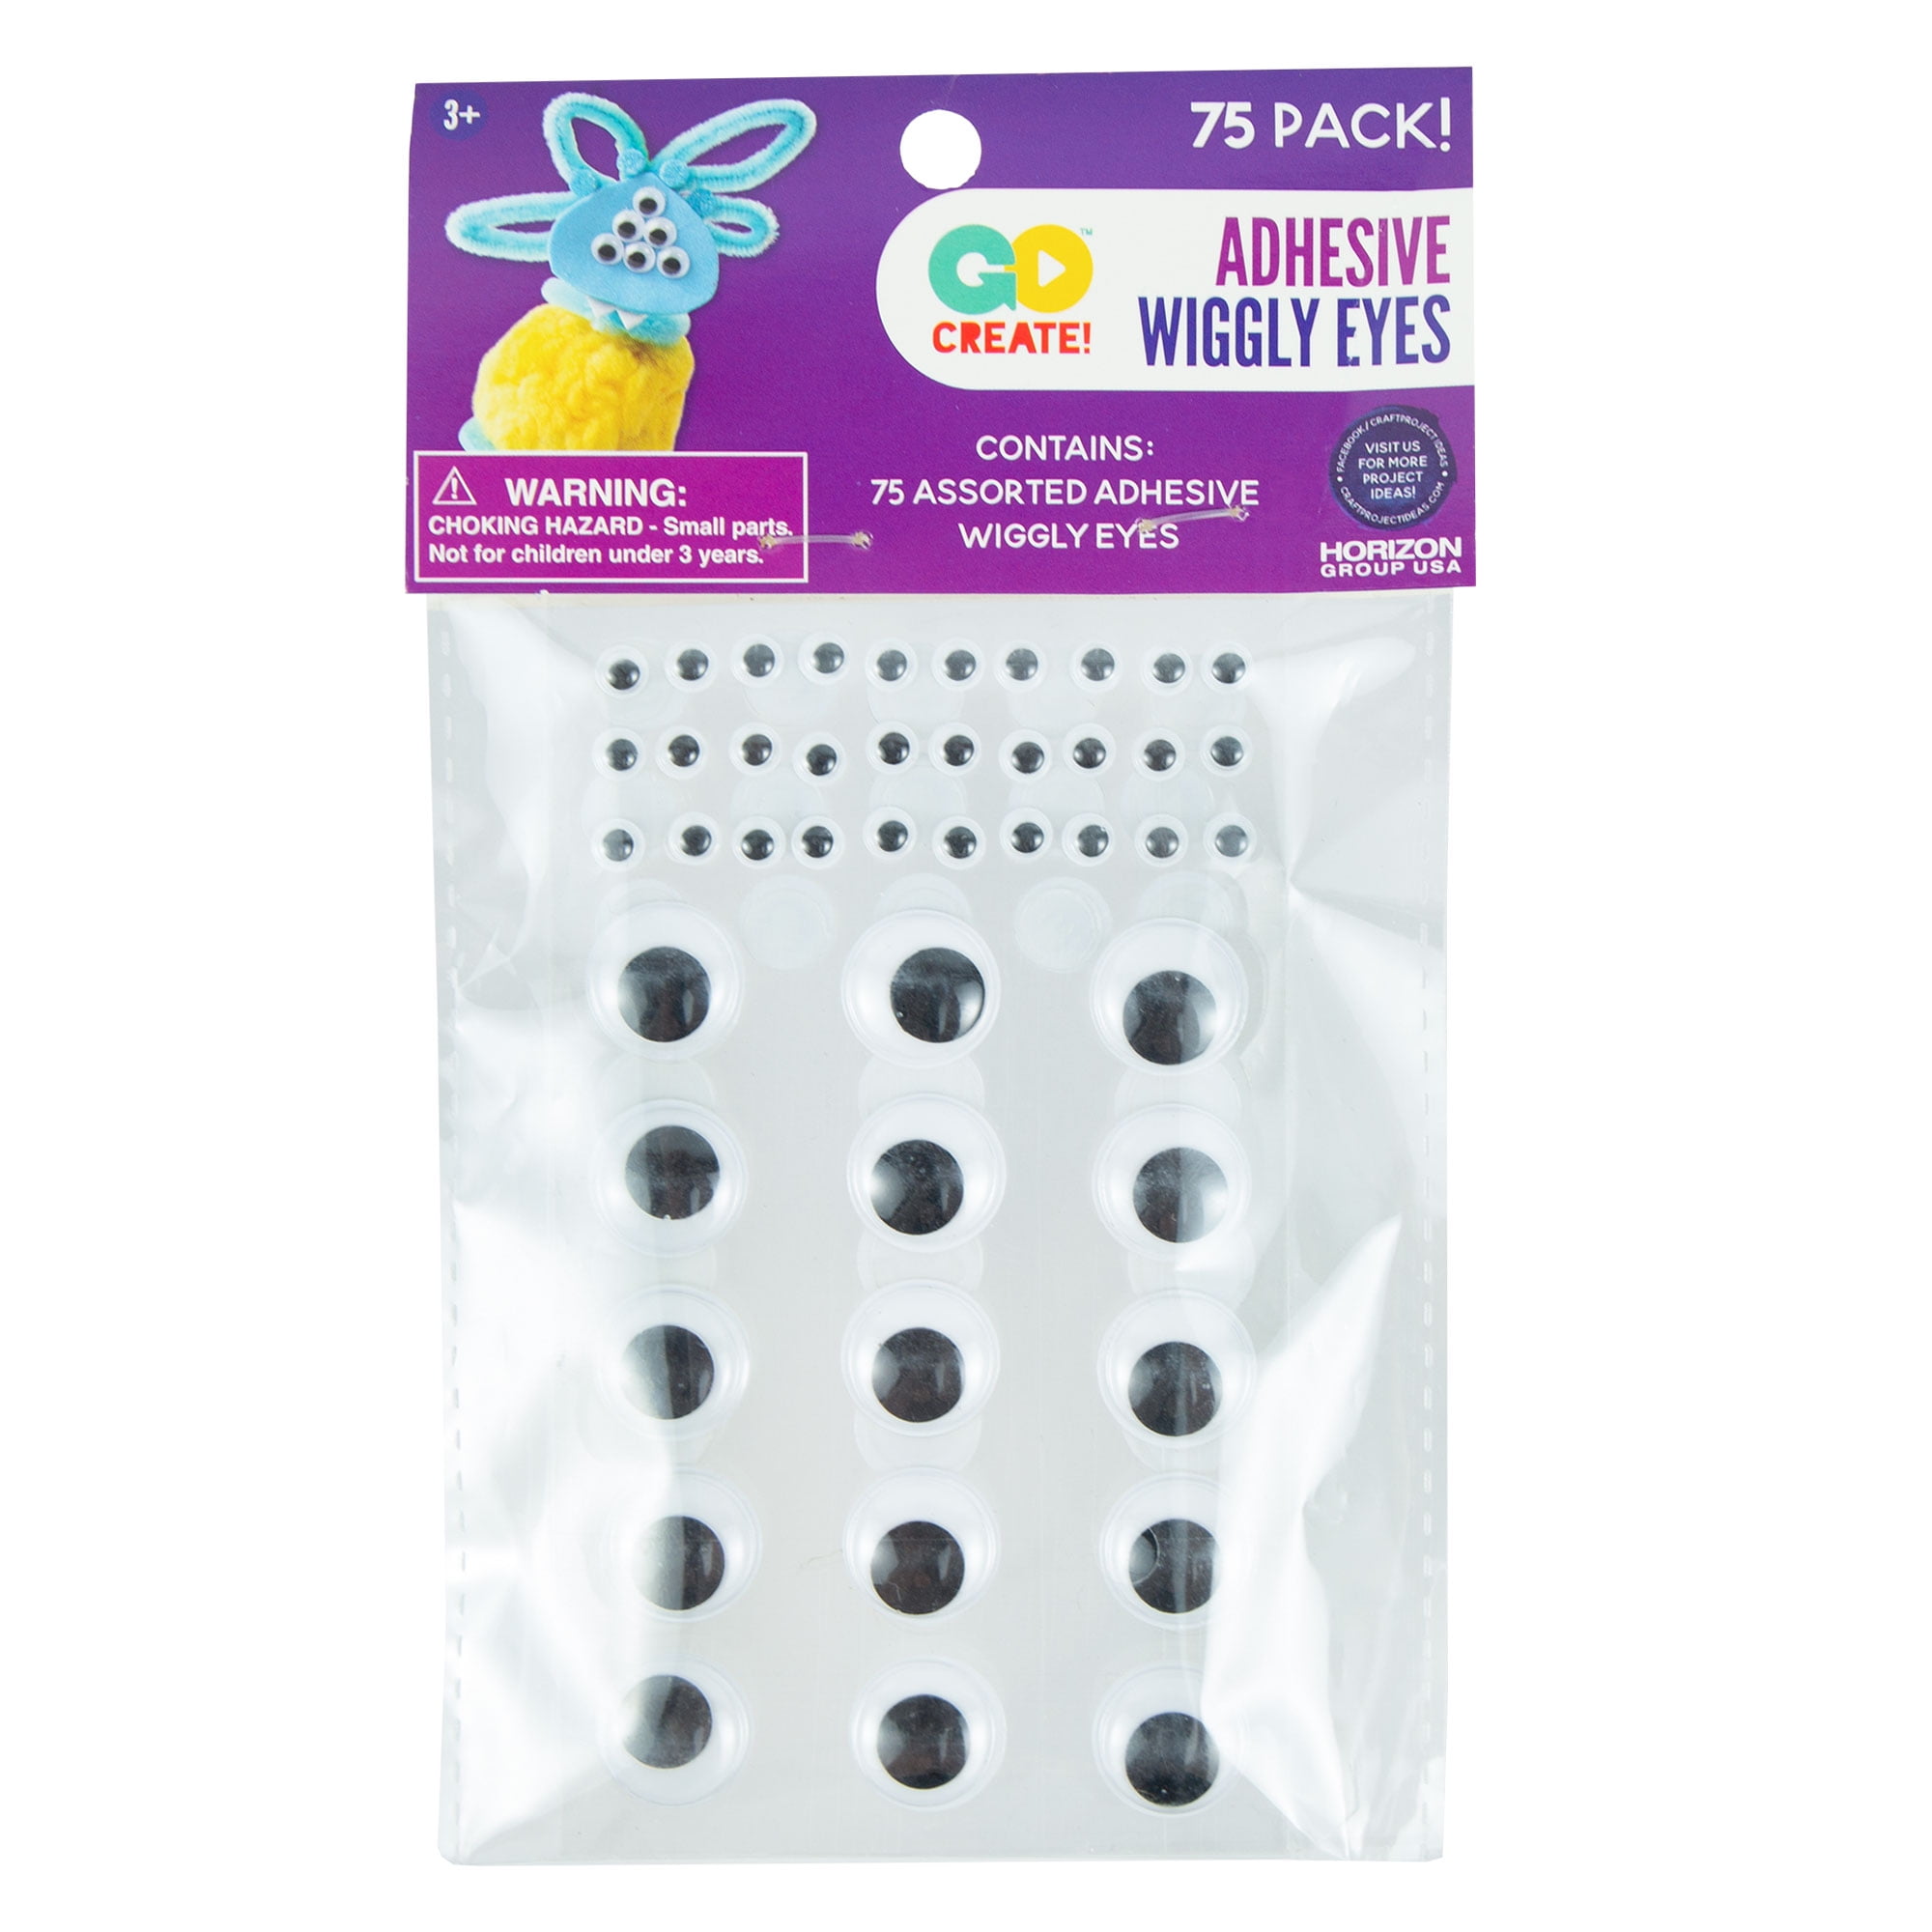 GOOGLY EYES Self Adhesive Wiggly Wobbly Eye Cardmaking Crafts School Projects 